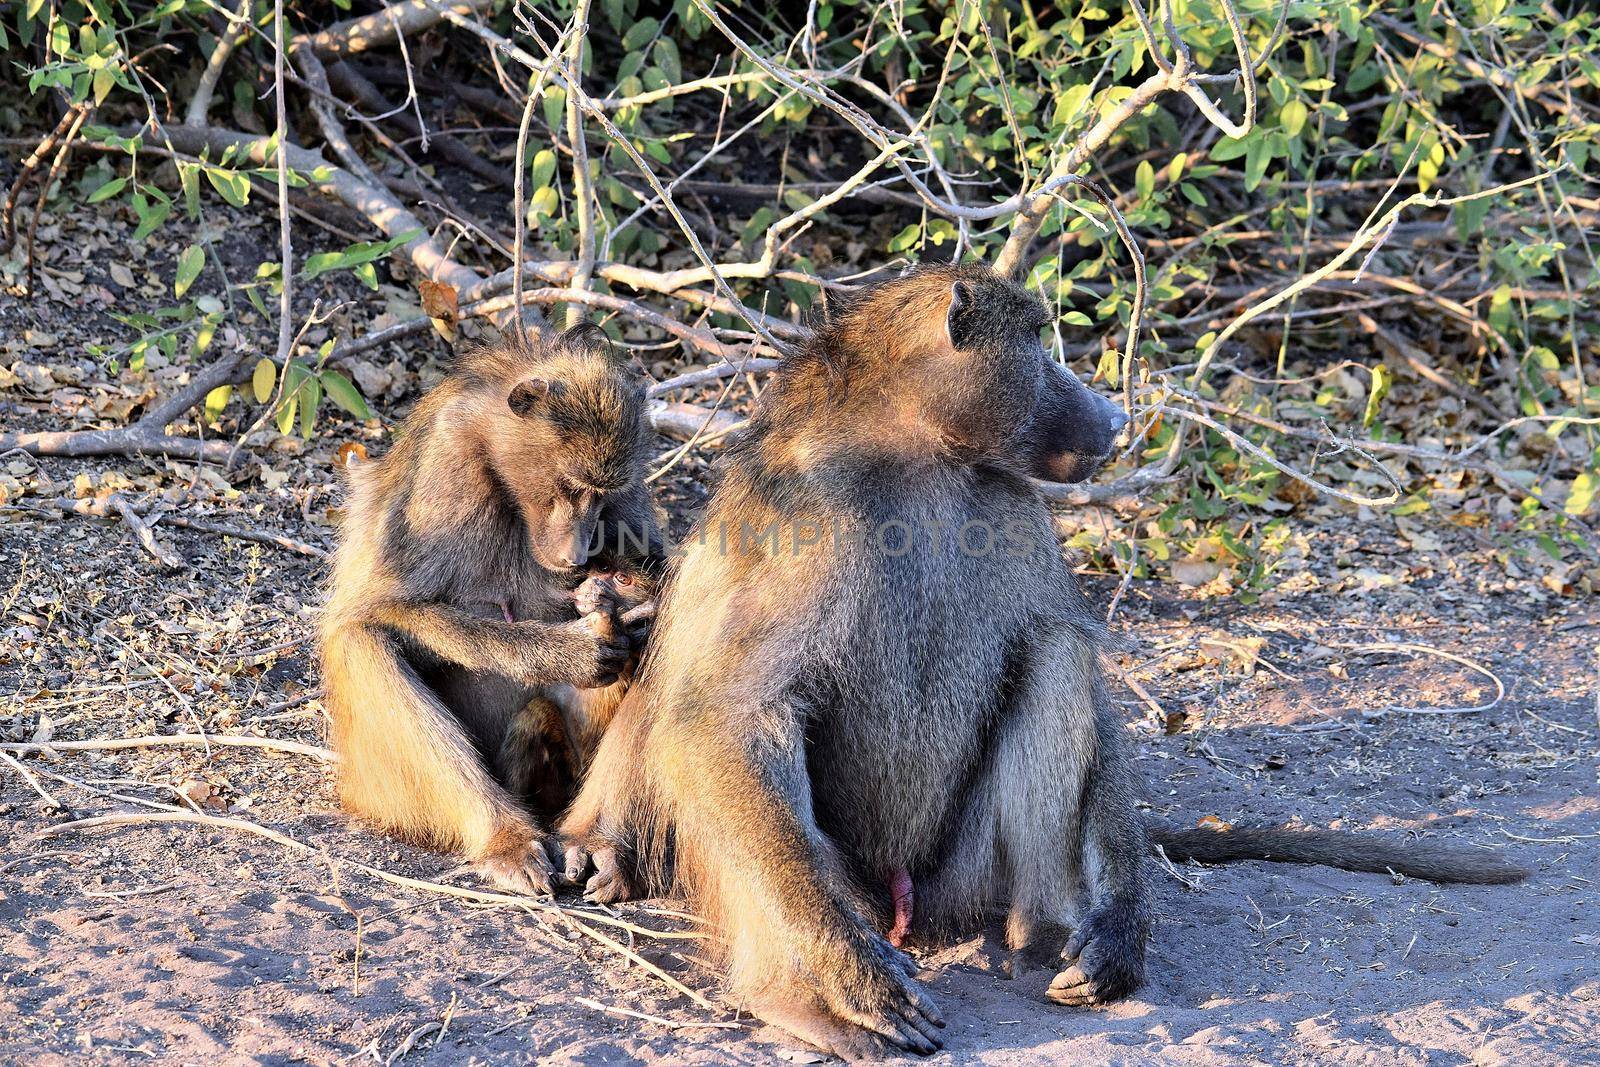 A group of baboons grooming themselves in Chobe National Park by silentstock639